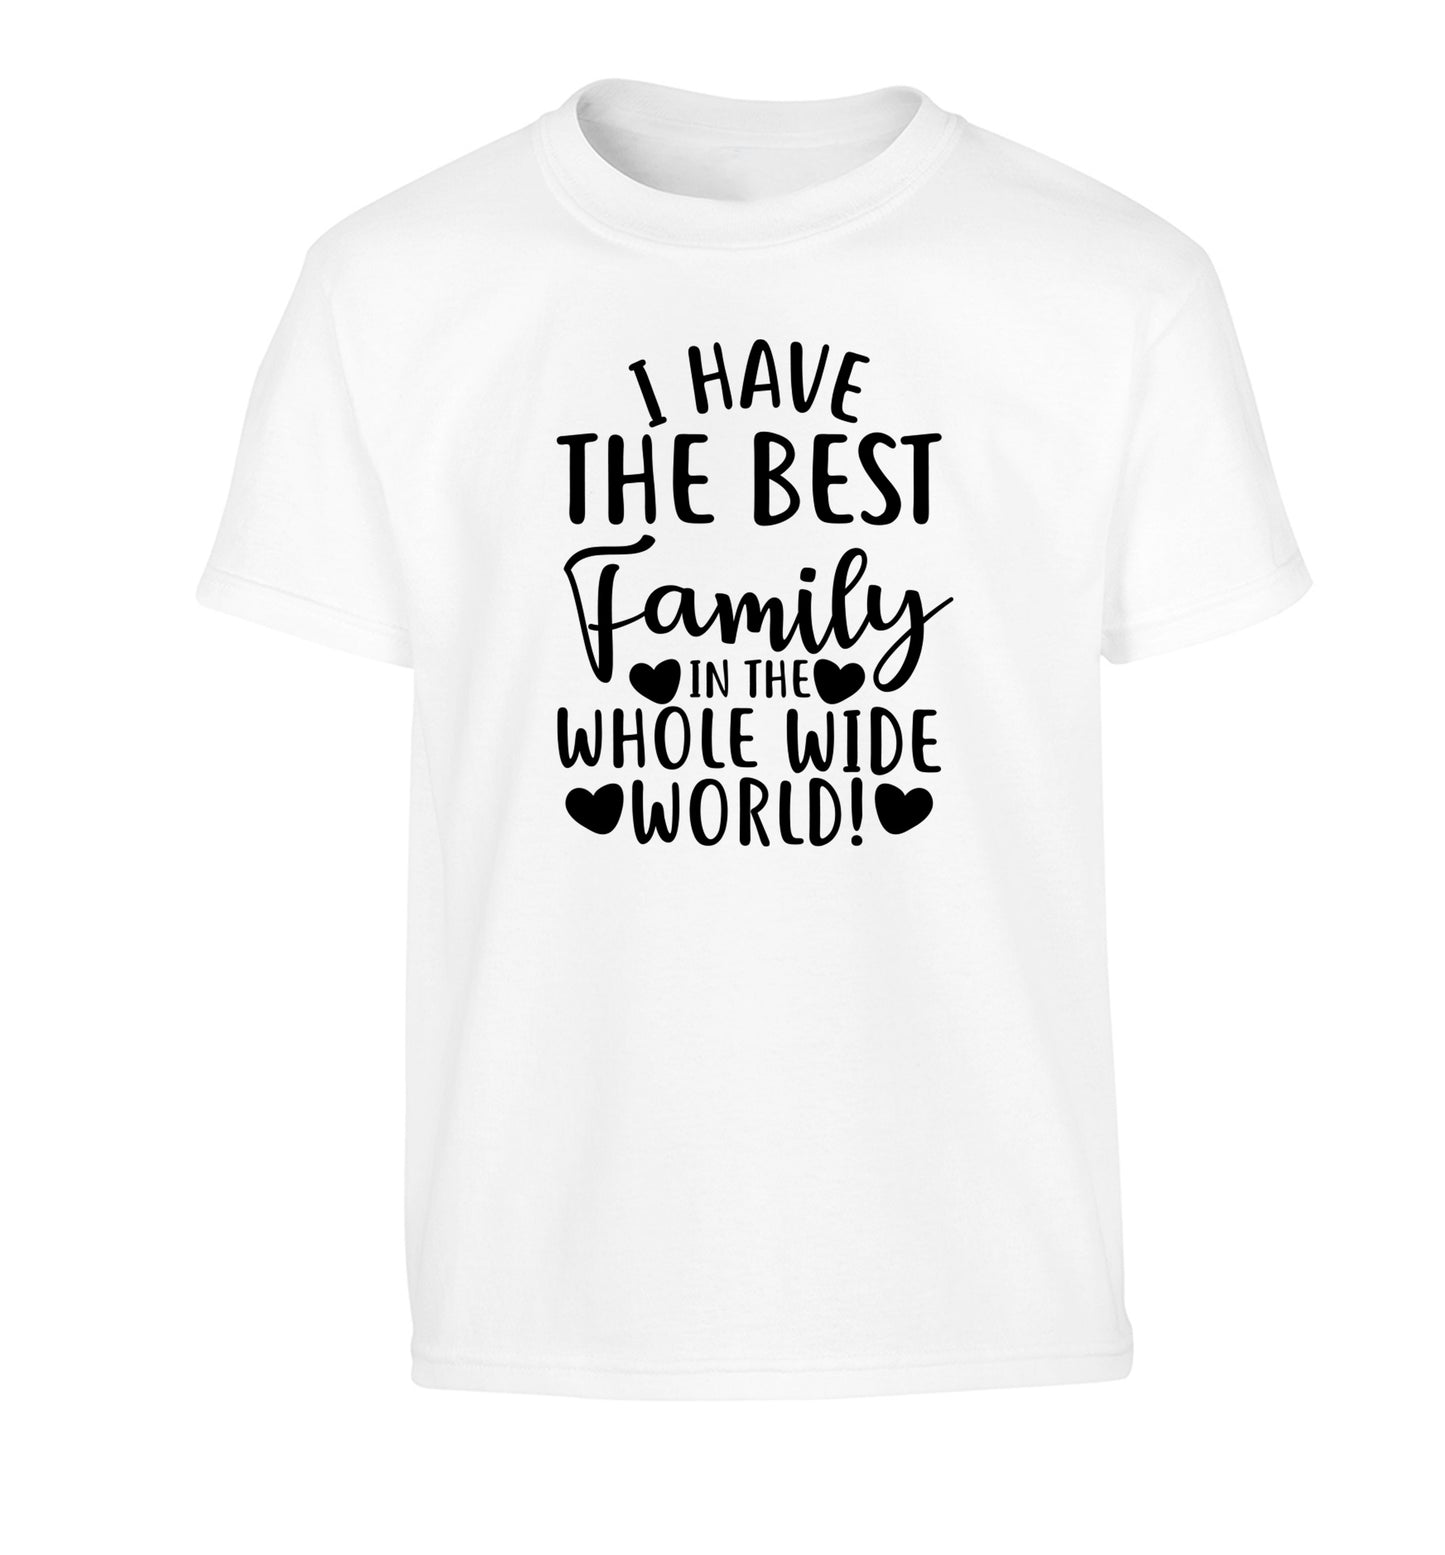 I have the best family in the whole wide world! Children's white Tshirt 12-13 Years